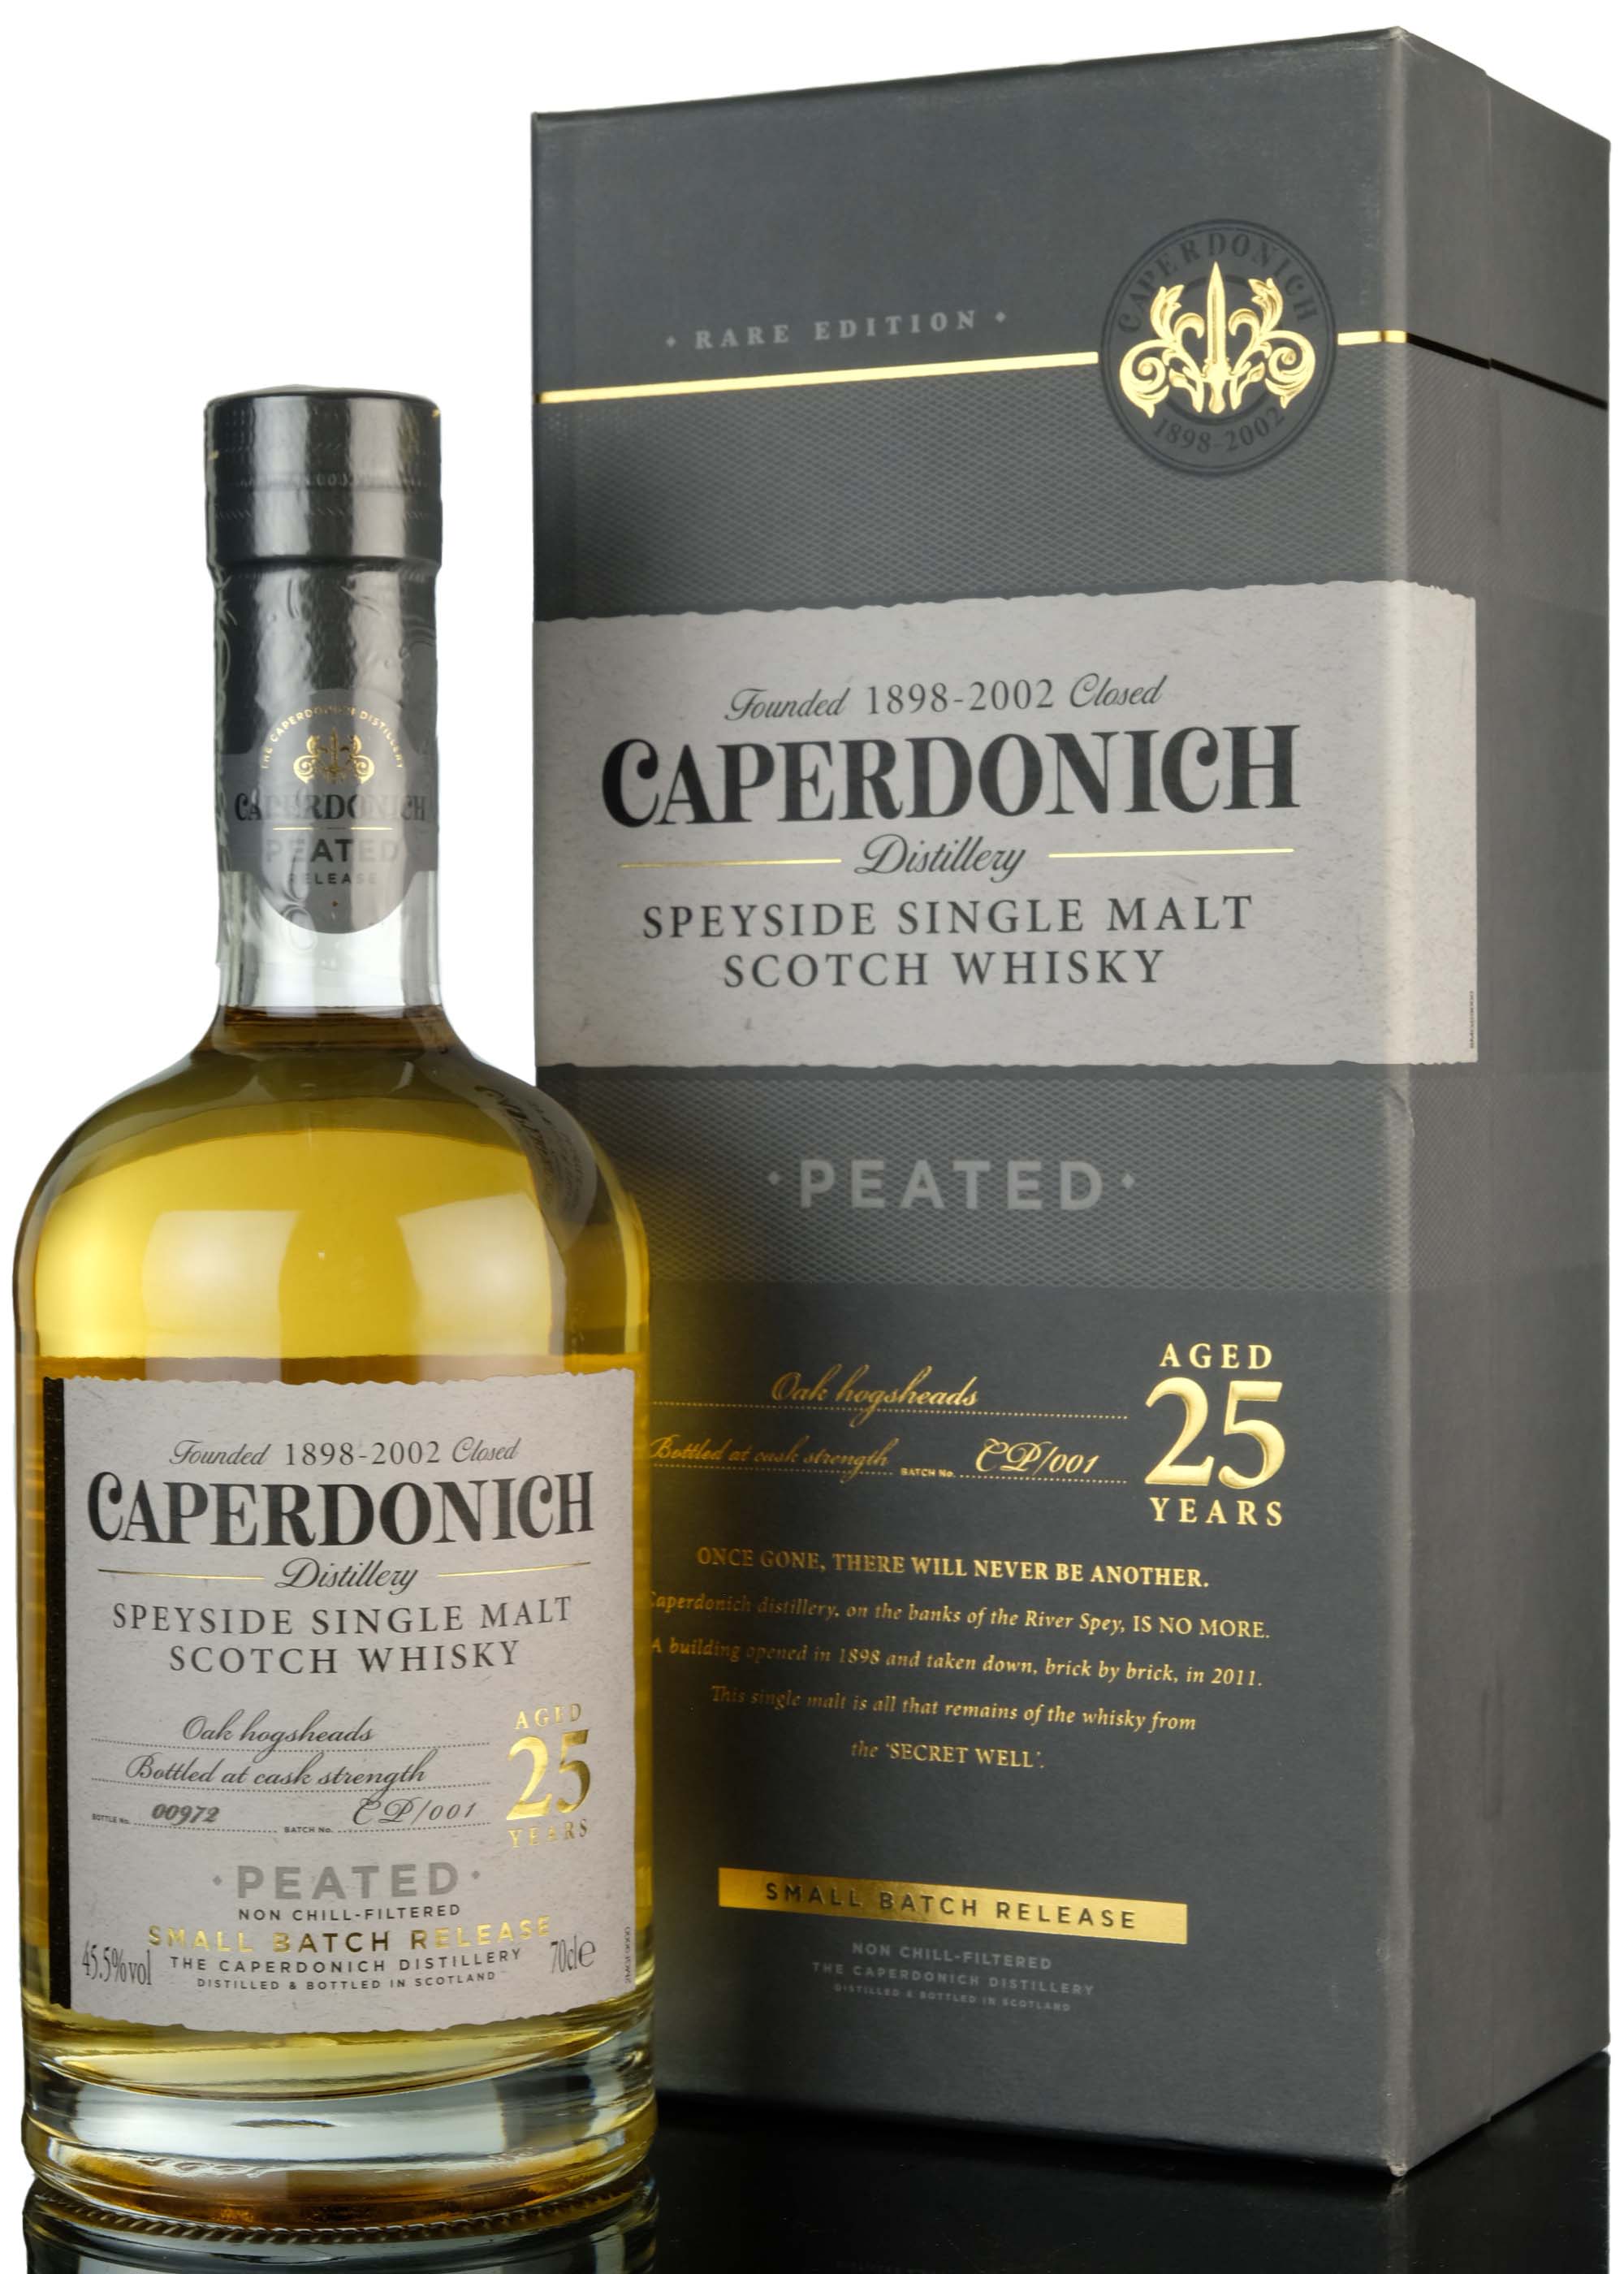 Caperdonich 25 Year Old - Small Batch Release 1 - 2019 Release